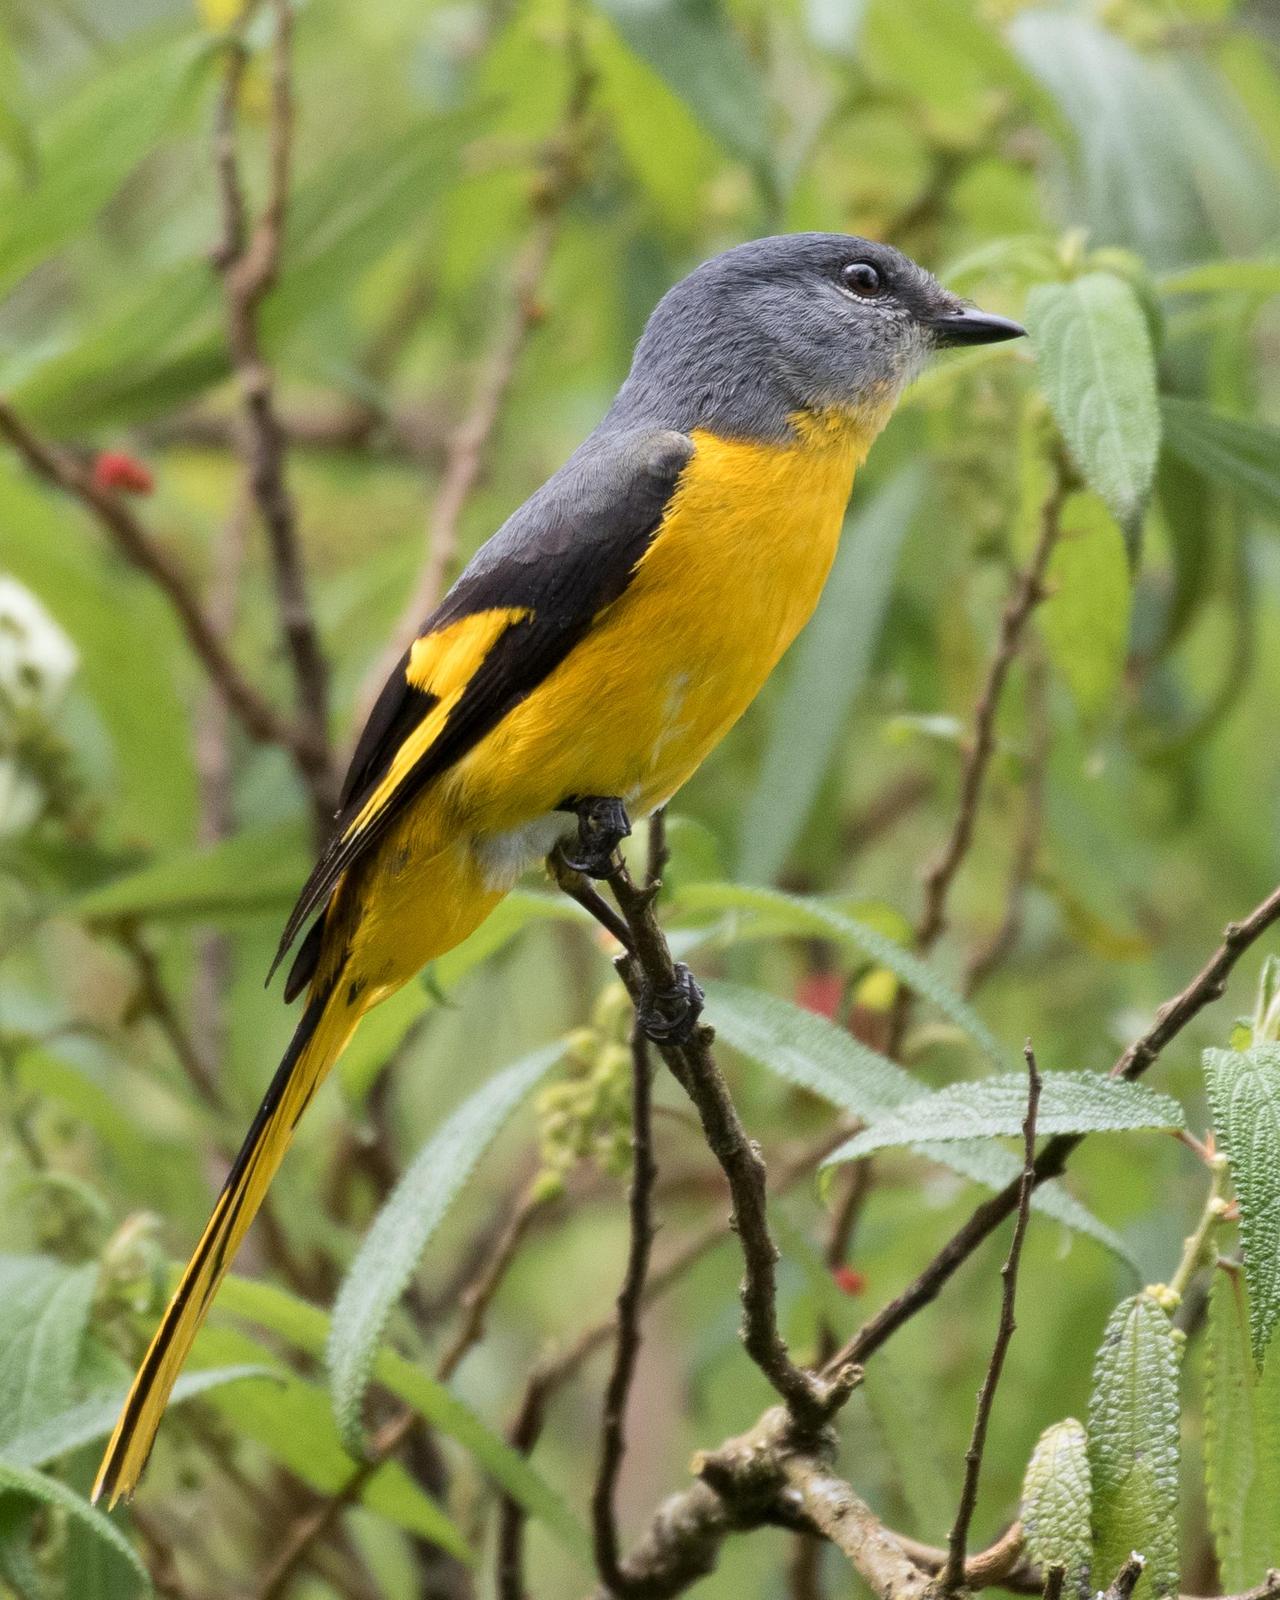 Gray-chinned Minivet Photo by Robert Lewis